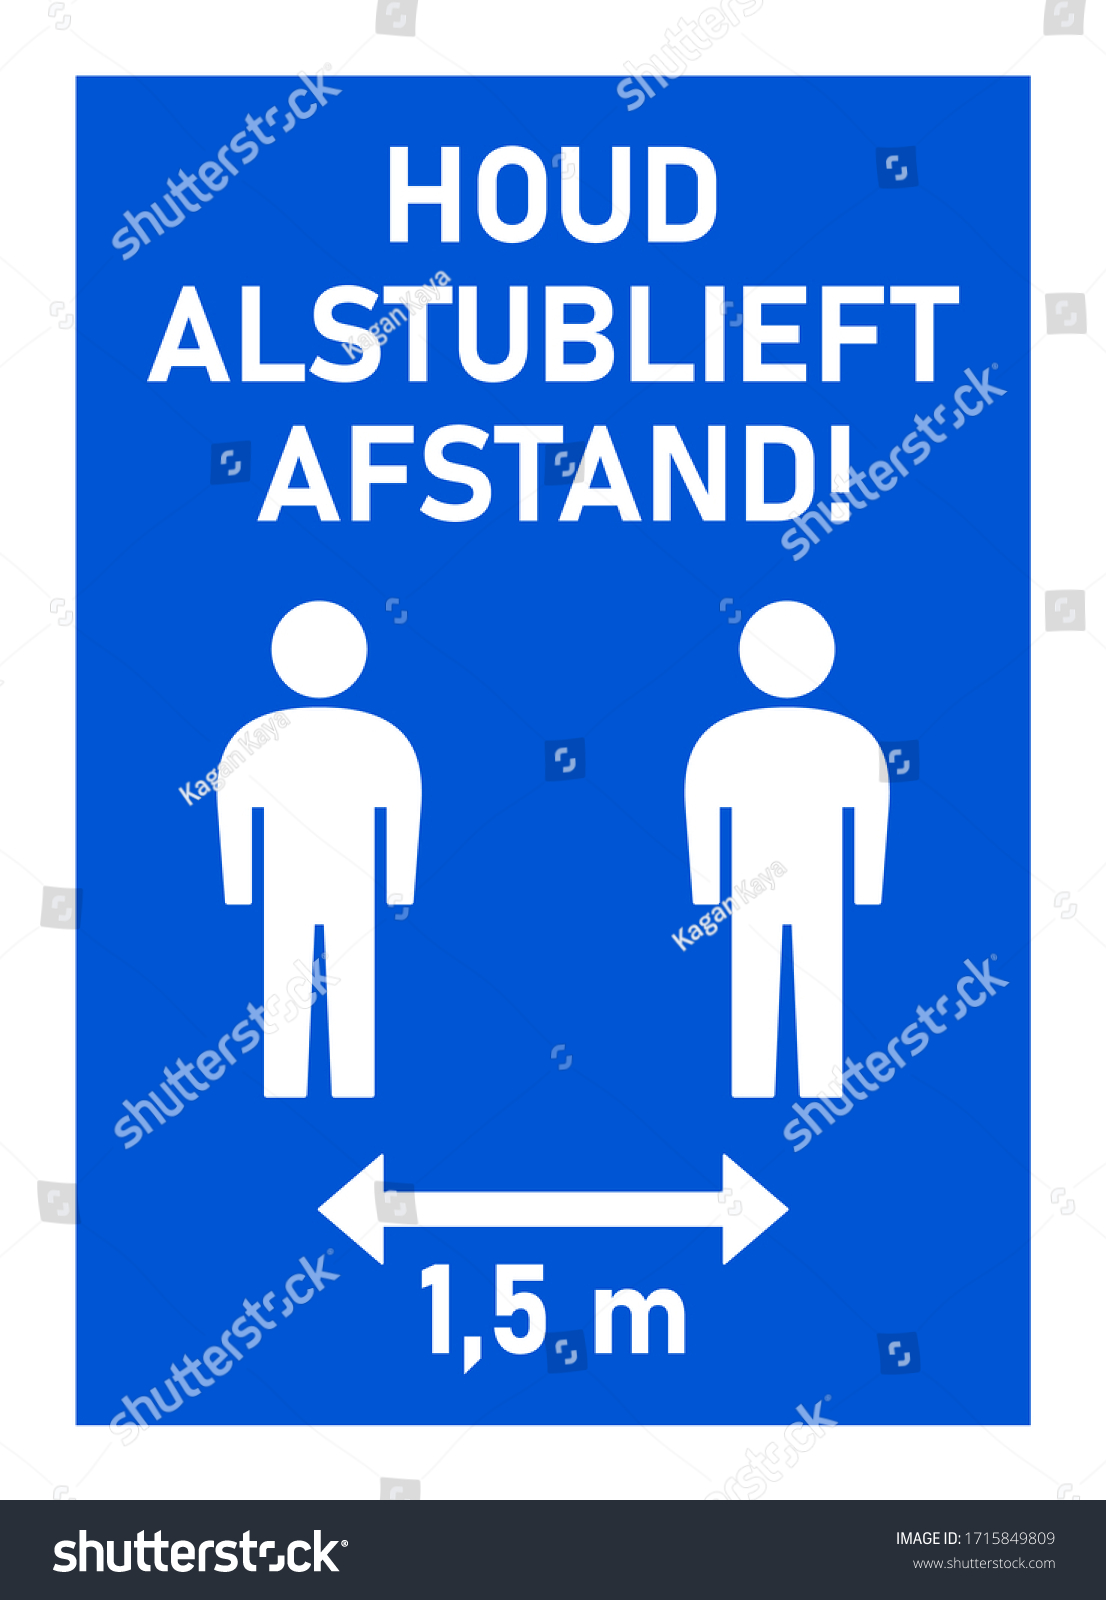 Houd Alstublieft Afstand ("Please Keep Distance" in Dutch) Social Distancing 1,5 Meters Instruction Icon against the Spread of the Novel Coronavirus Covid-19. Vector Image. #1715849809